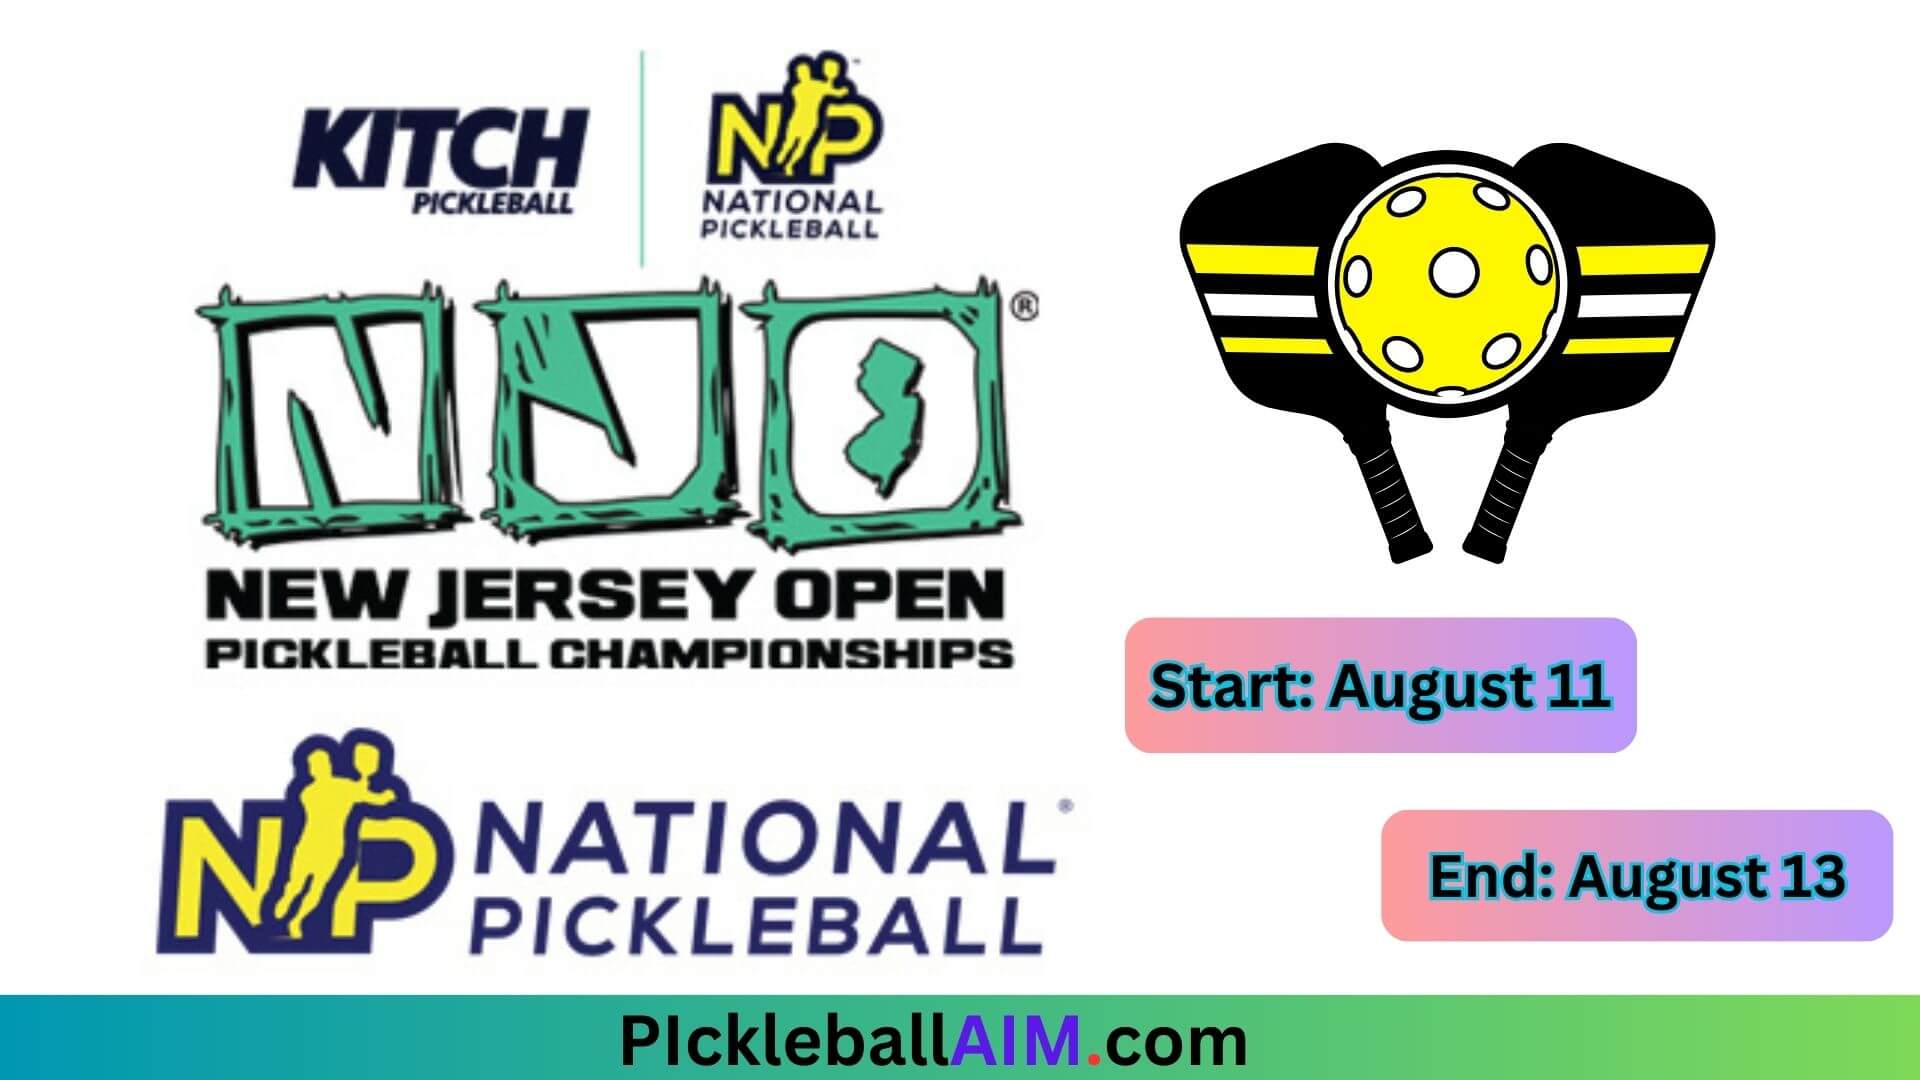 NP Kitch New Jersey Open With $15K Prize Pool!